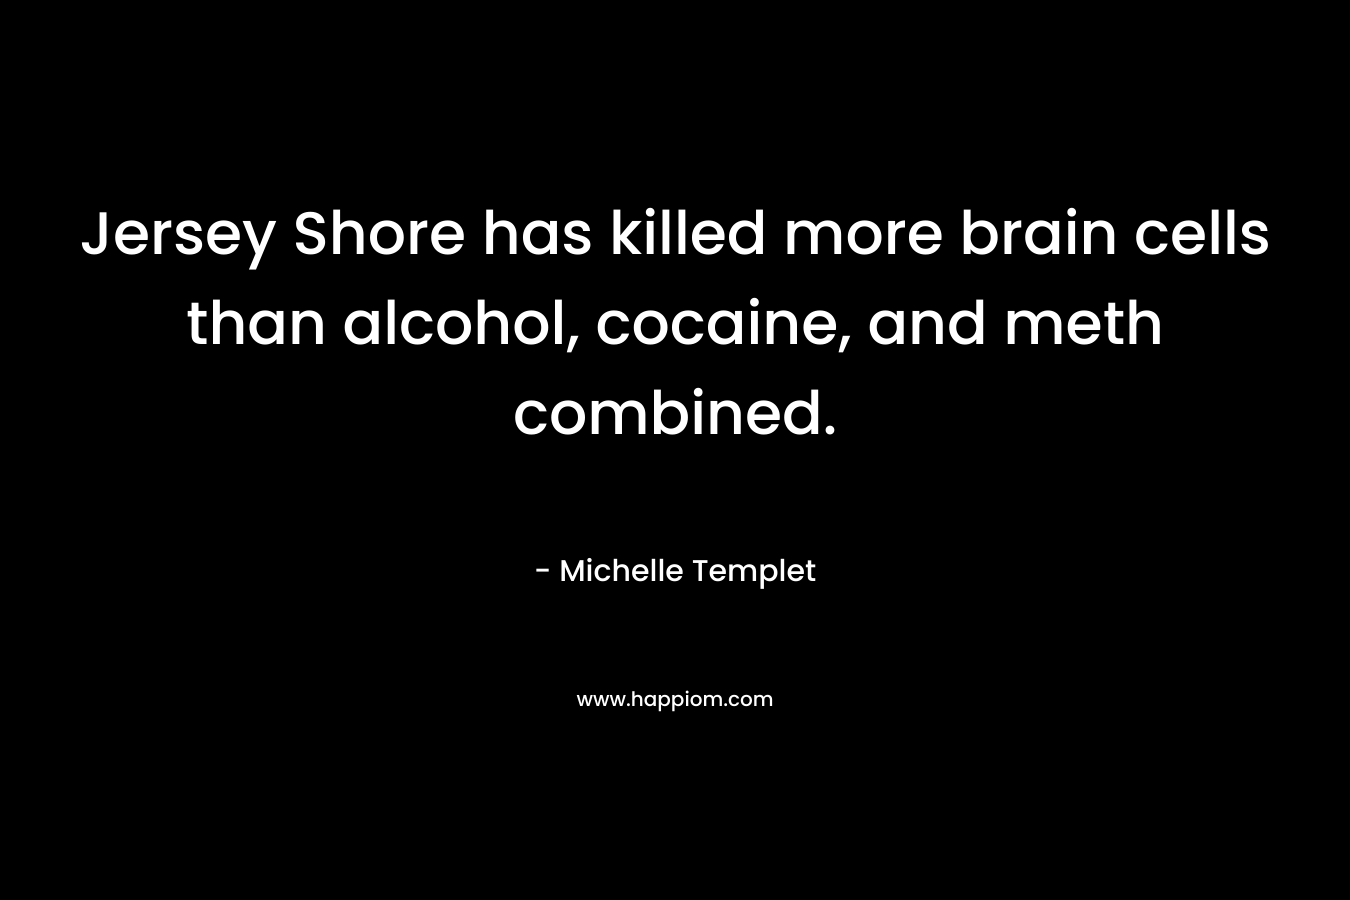 Jersey Shore has killed more brain cells than alcohol, cocaine, and meth combined. – Michelle Templet